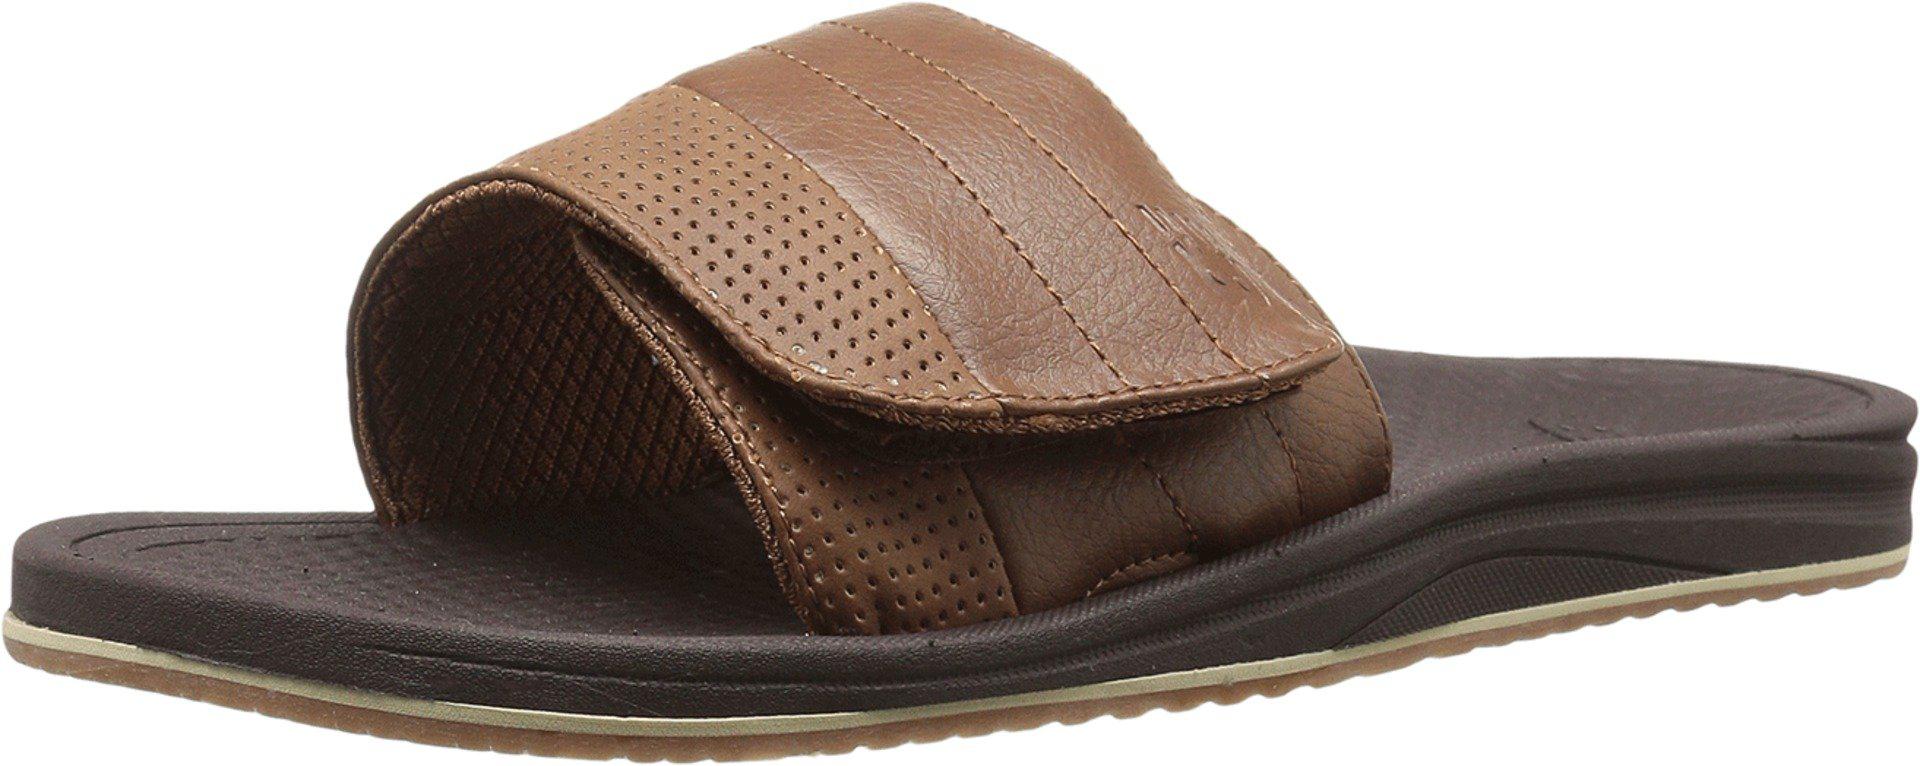 New Balance Synthetic Recharge Slide Sandal in Brown for Men - Lyst